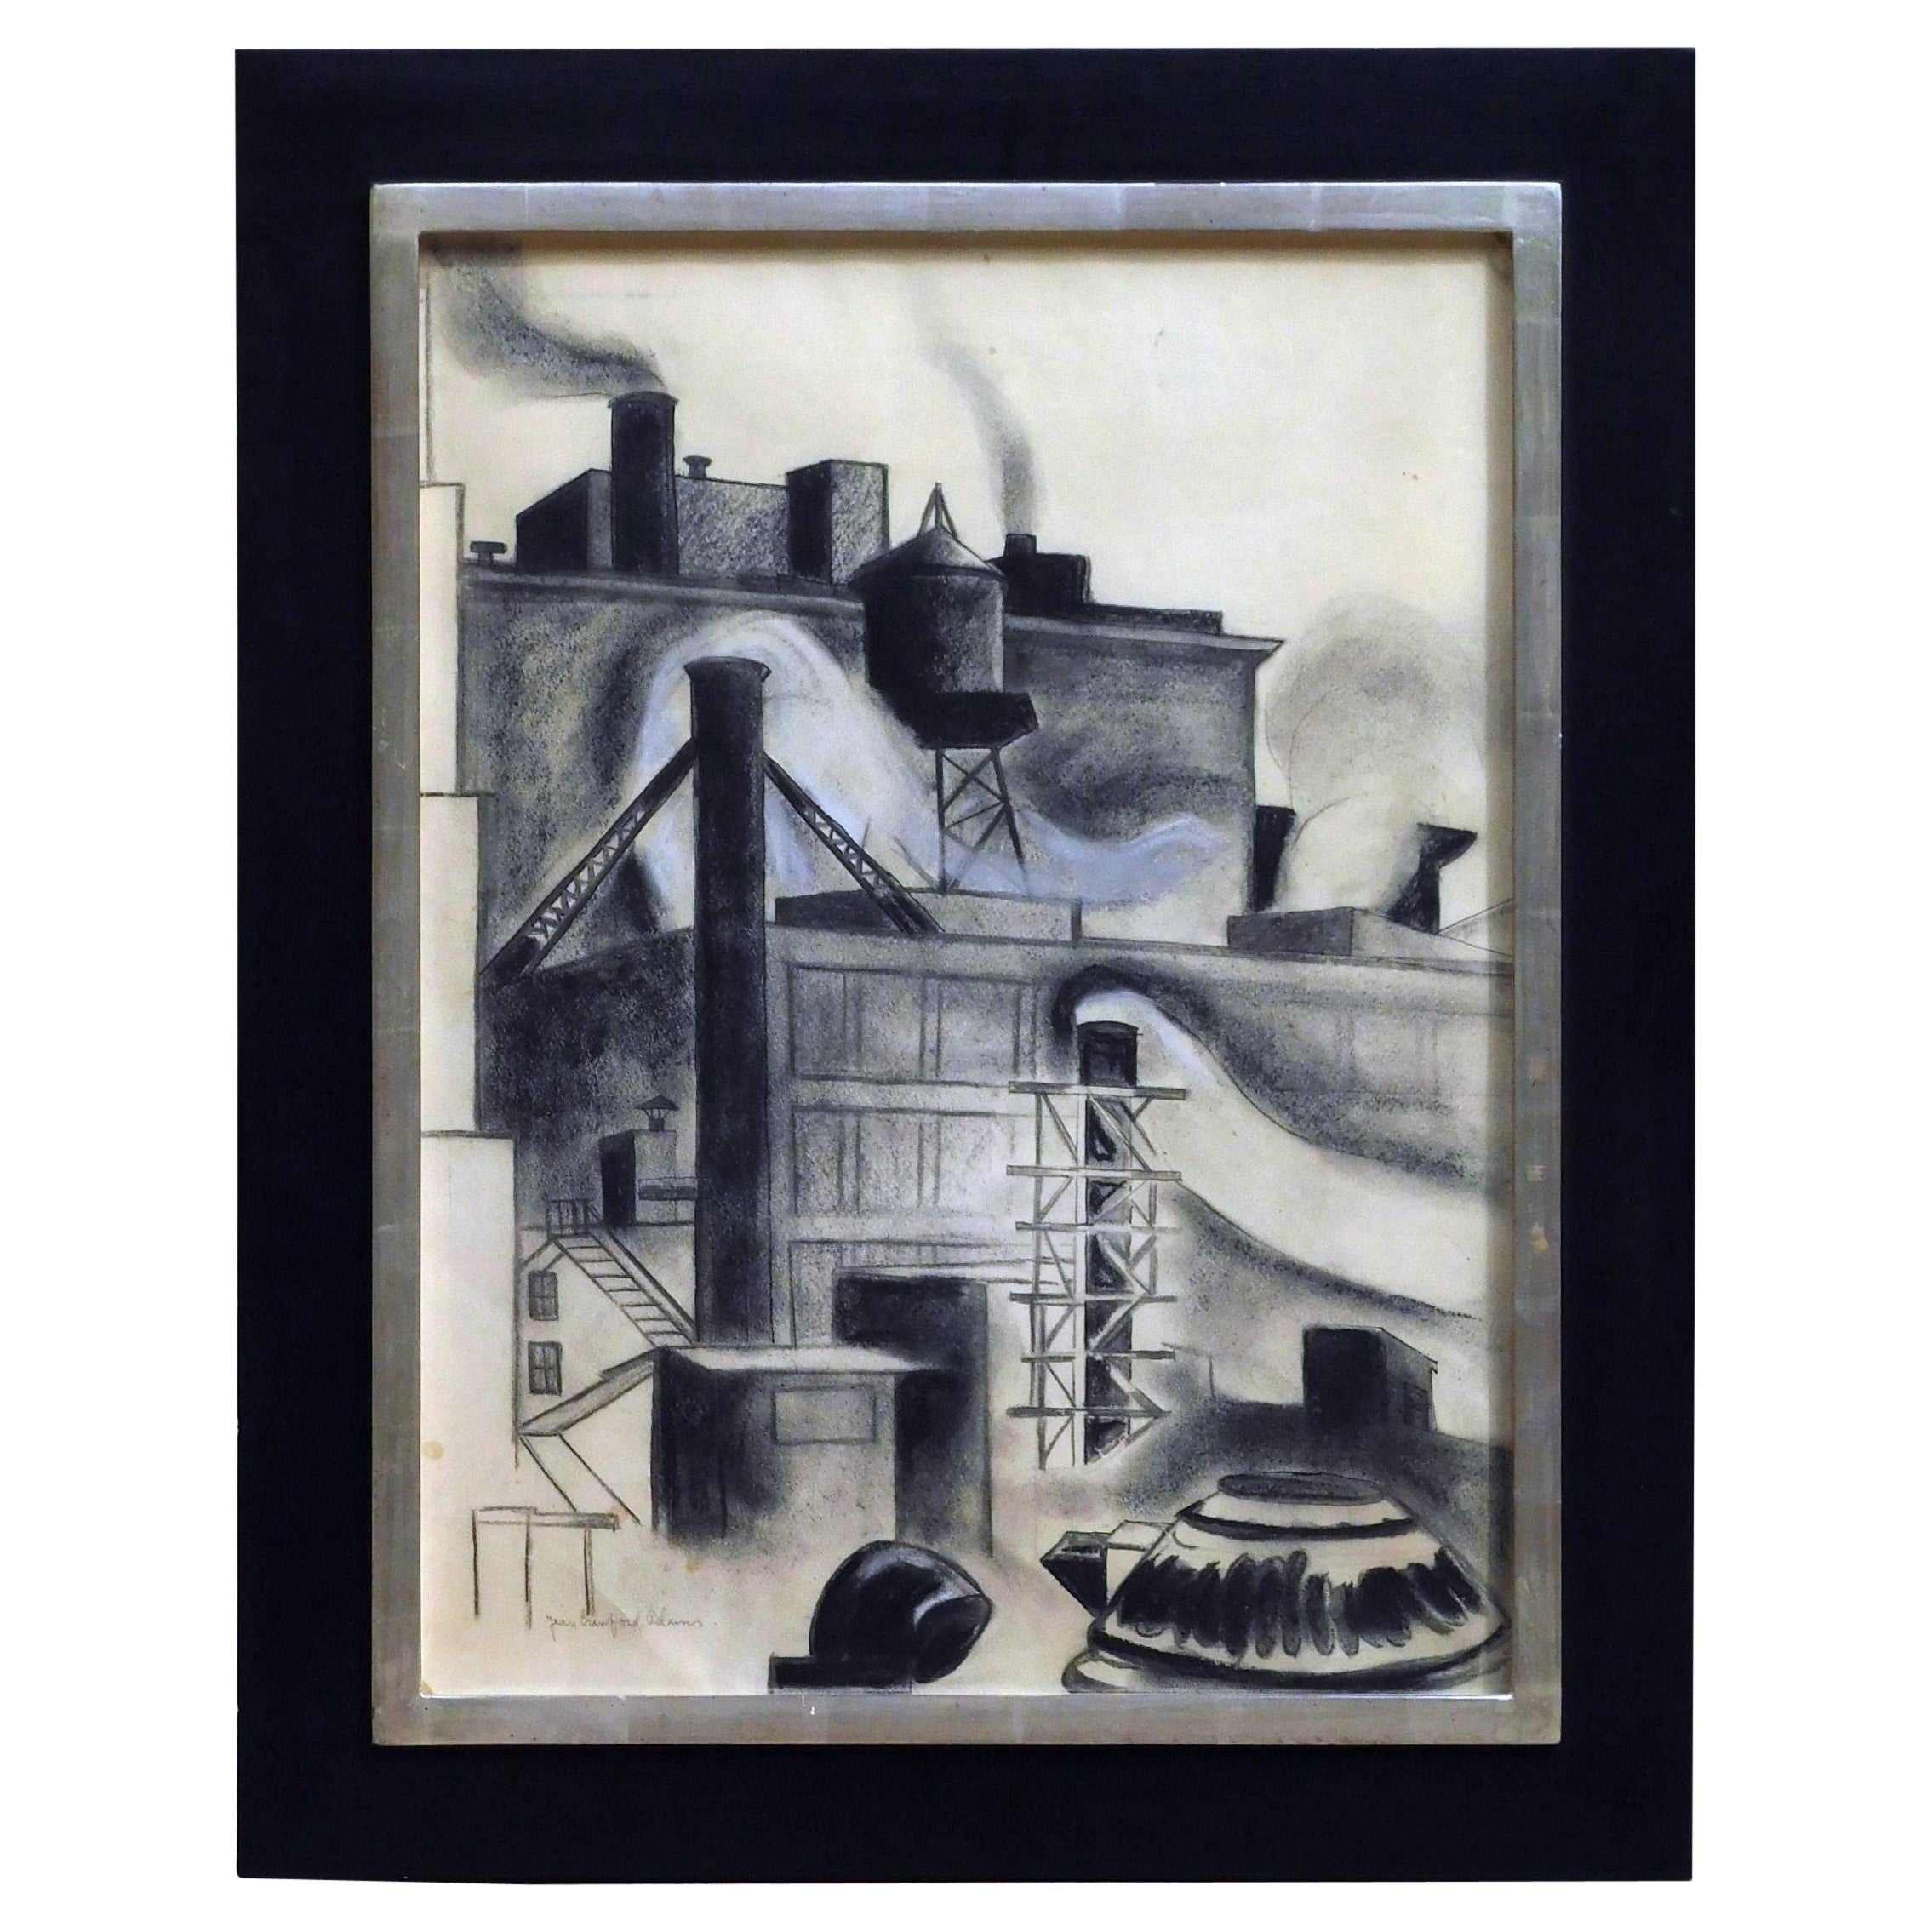 Jean Crawford Adams Original Drawing Chicago, circa 1930. “View from the Studio”